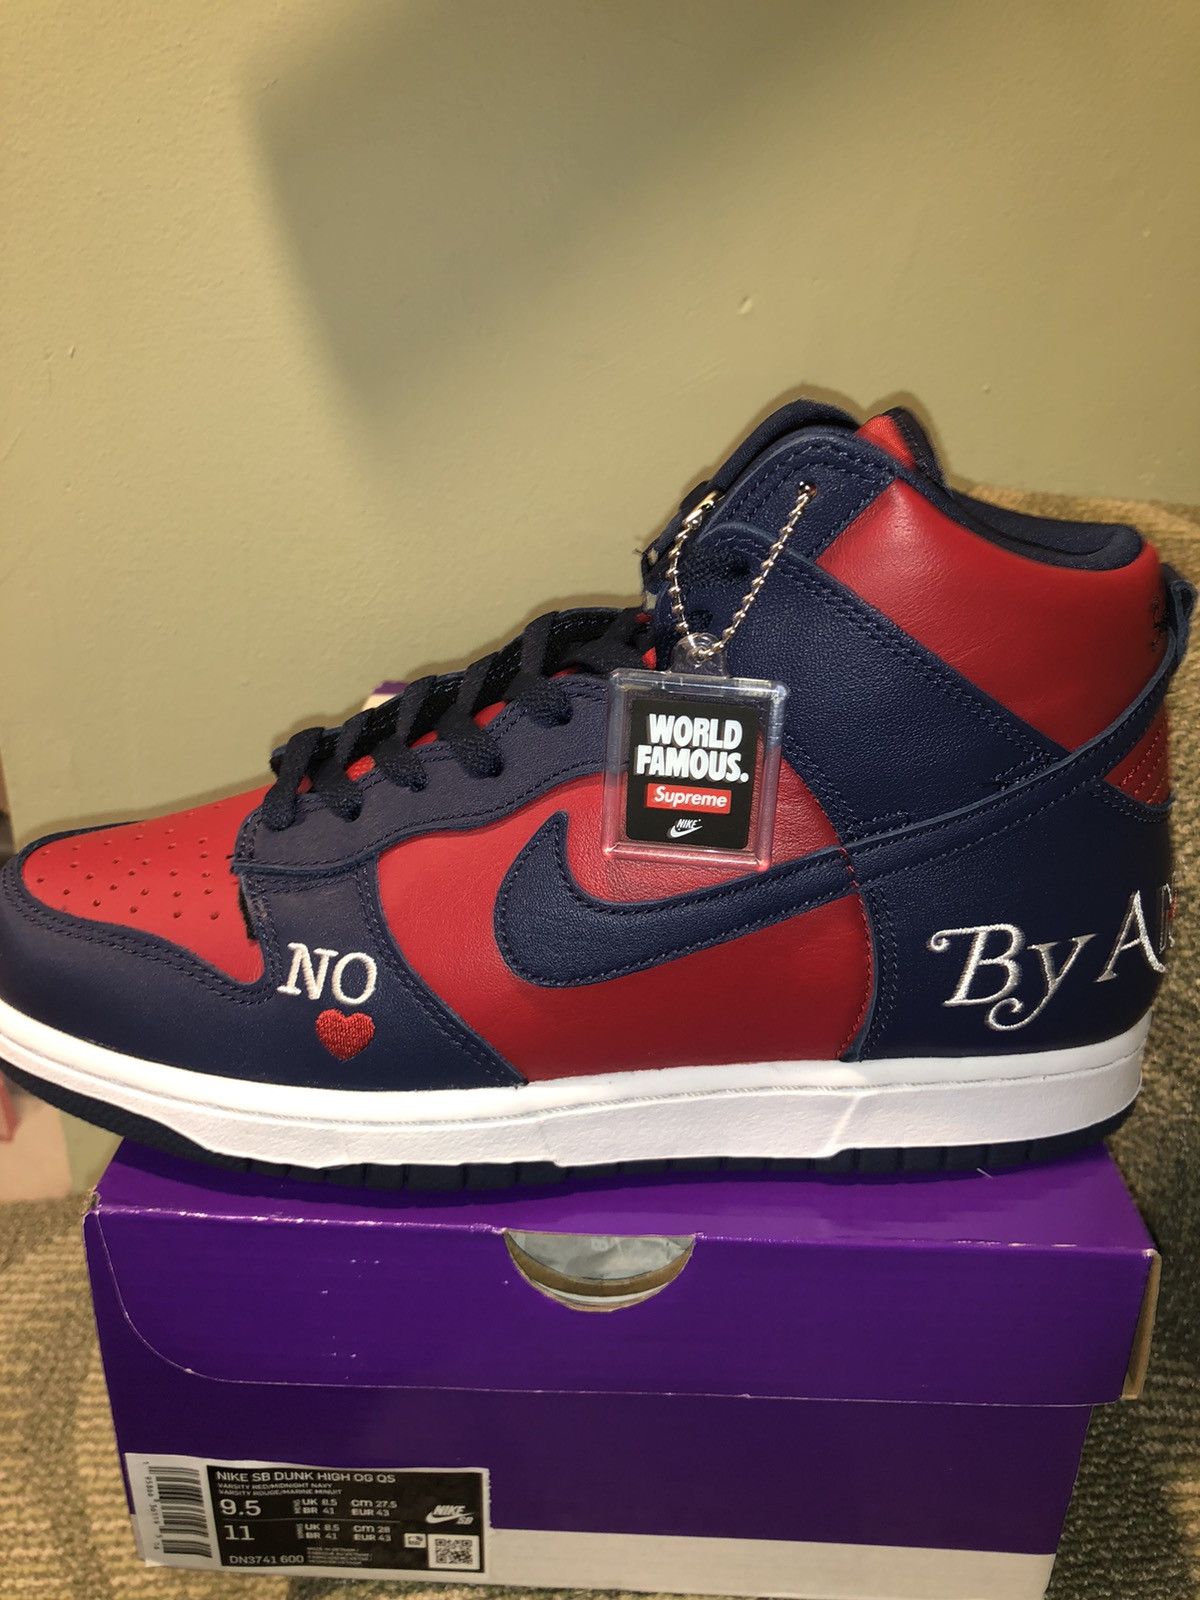 Pre-owned Nike X Supreme Nike Sb Dunk High Supreme By Any Means Shoes In Navy/red/white